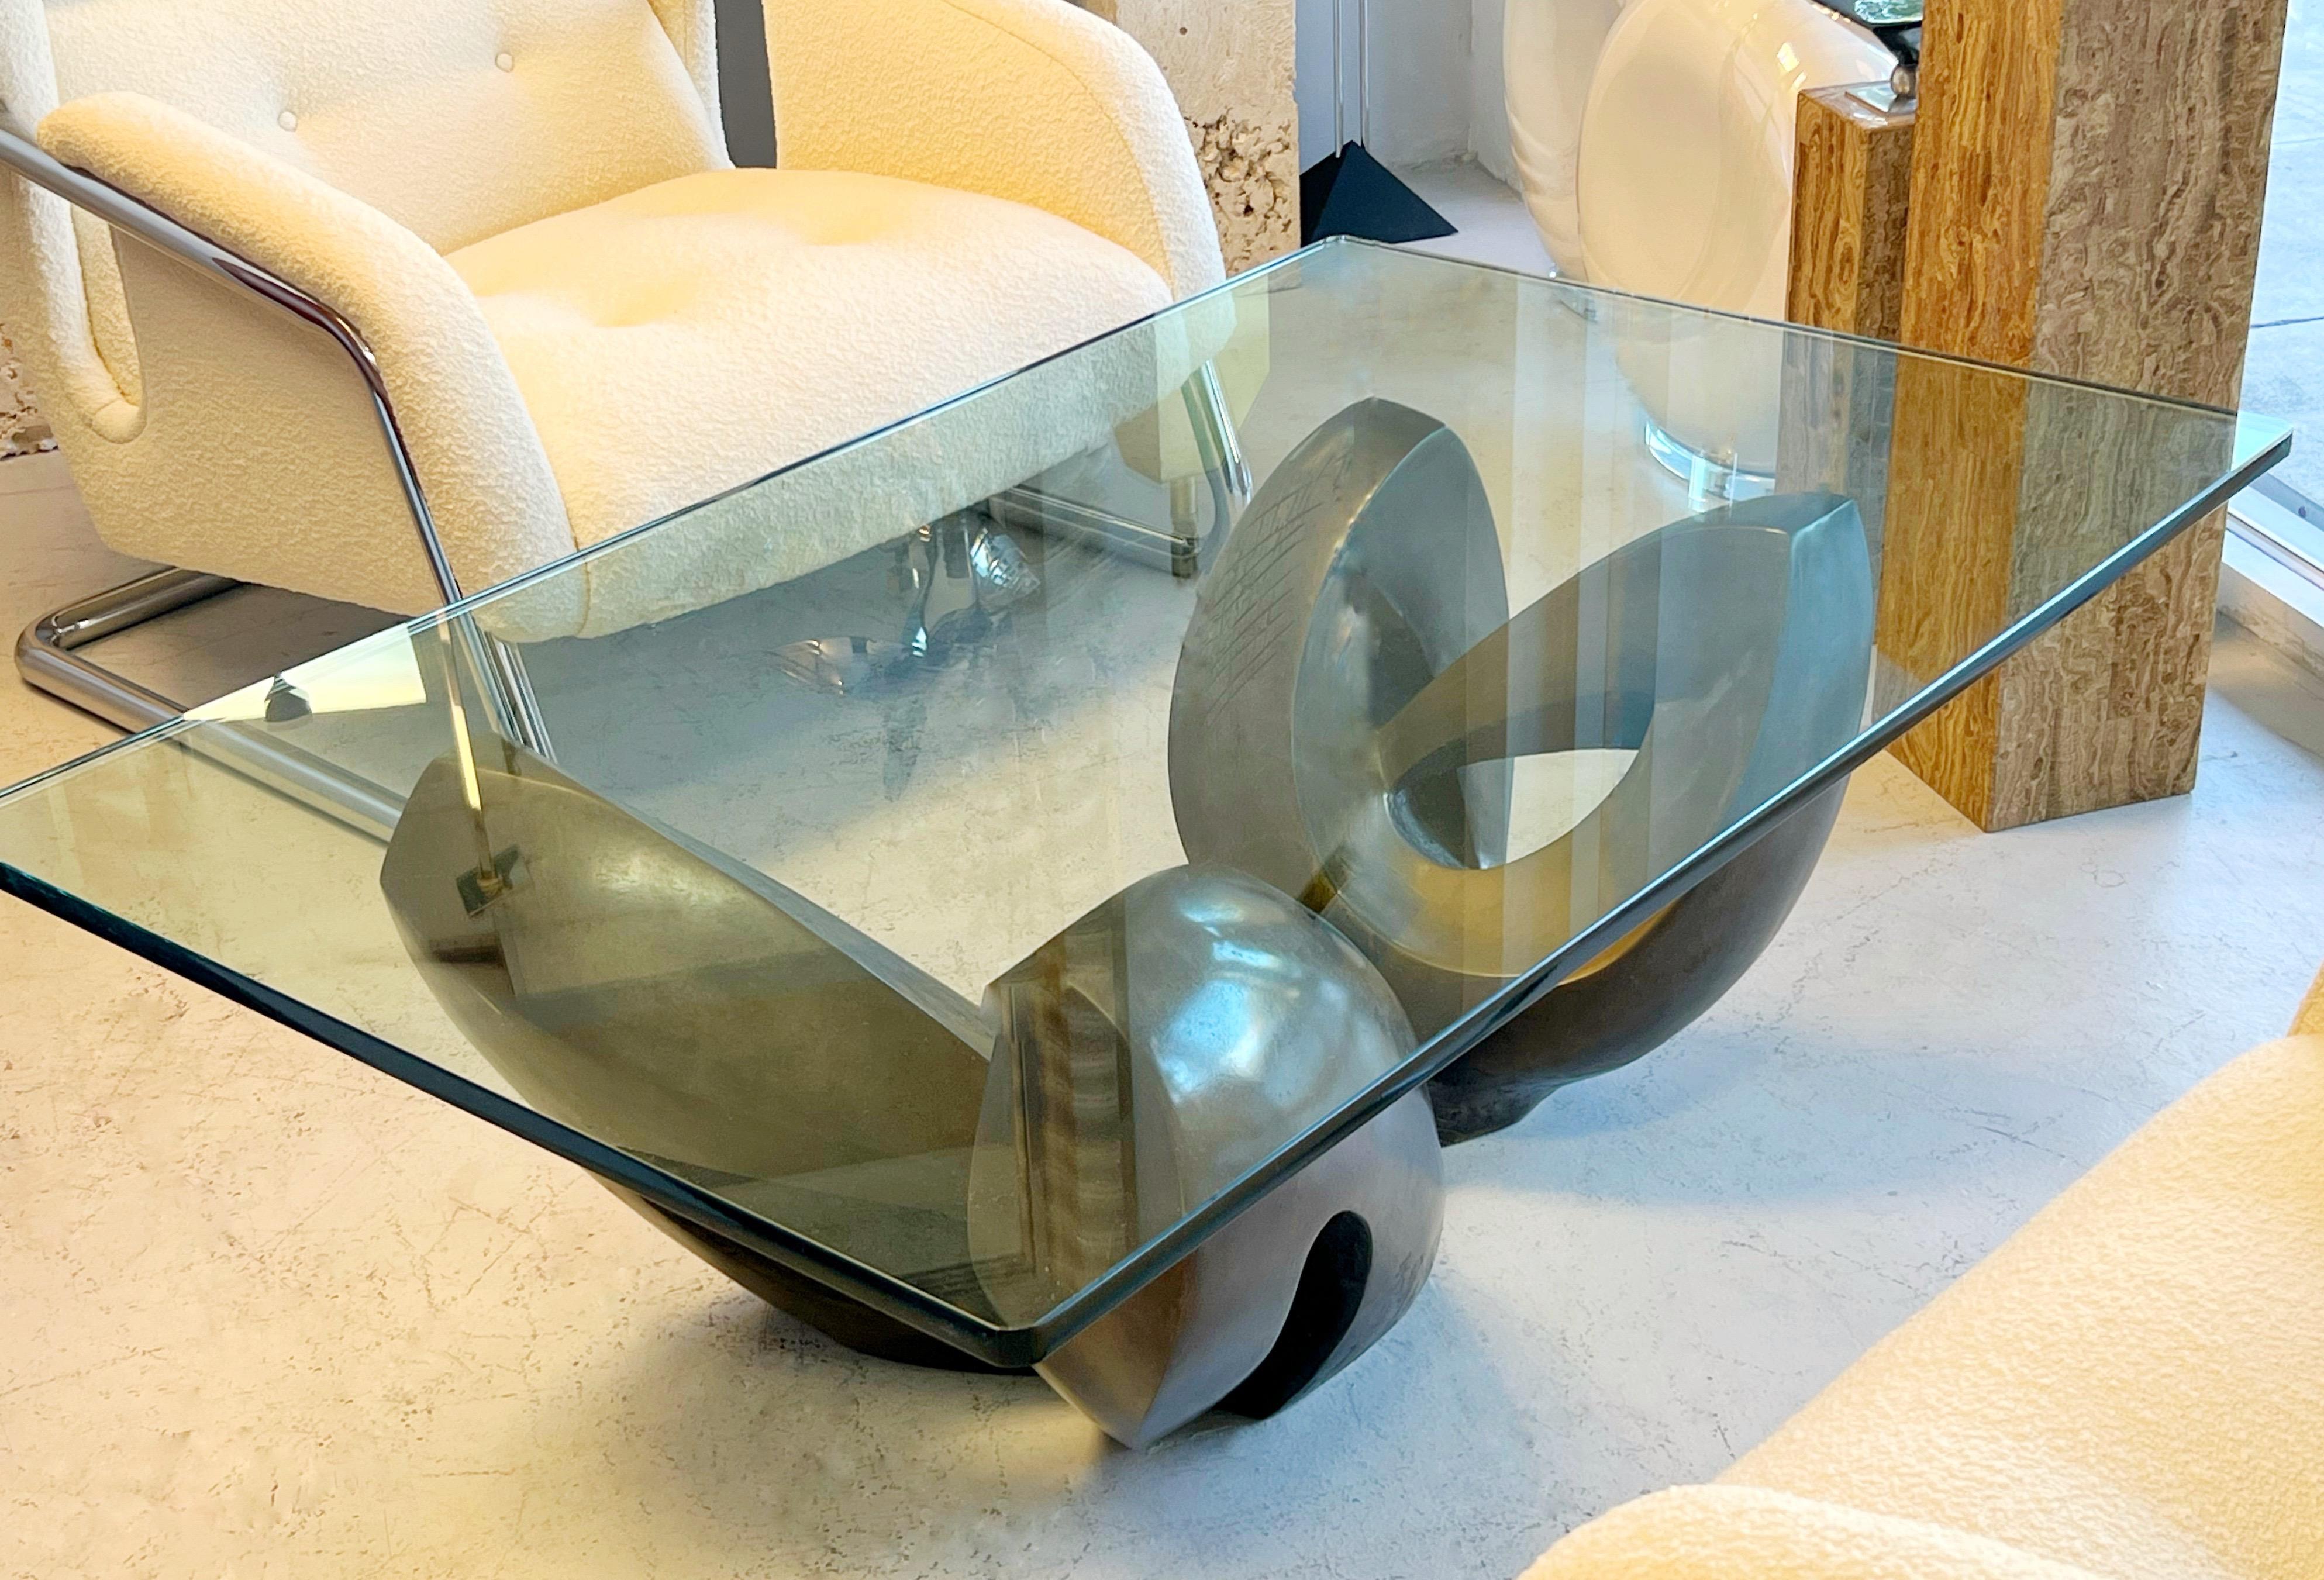 Extraordinary sculptural bronze coffee table with glass top. The shape is reminiscent of Barbara Hepworth or Henri Moore sculptures.